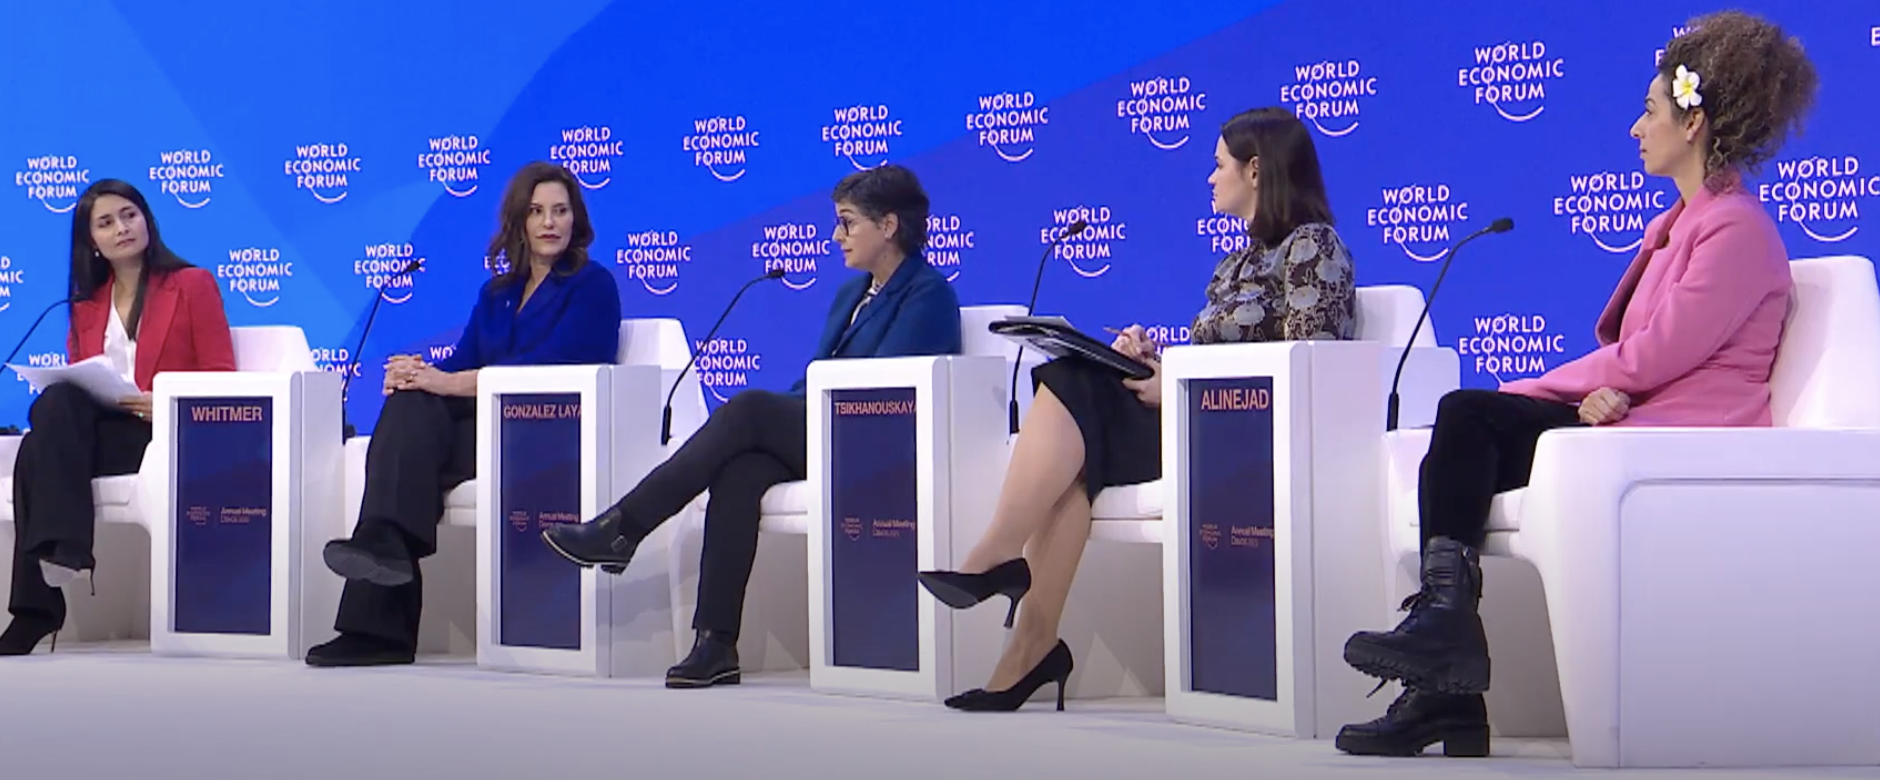 a group of 5 women speaking on a stage about reaching gender parity in leadership at the world economic forum conference in Davos